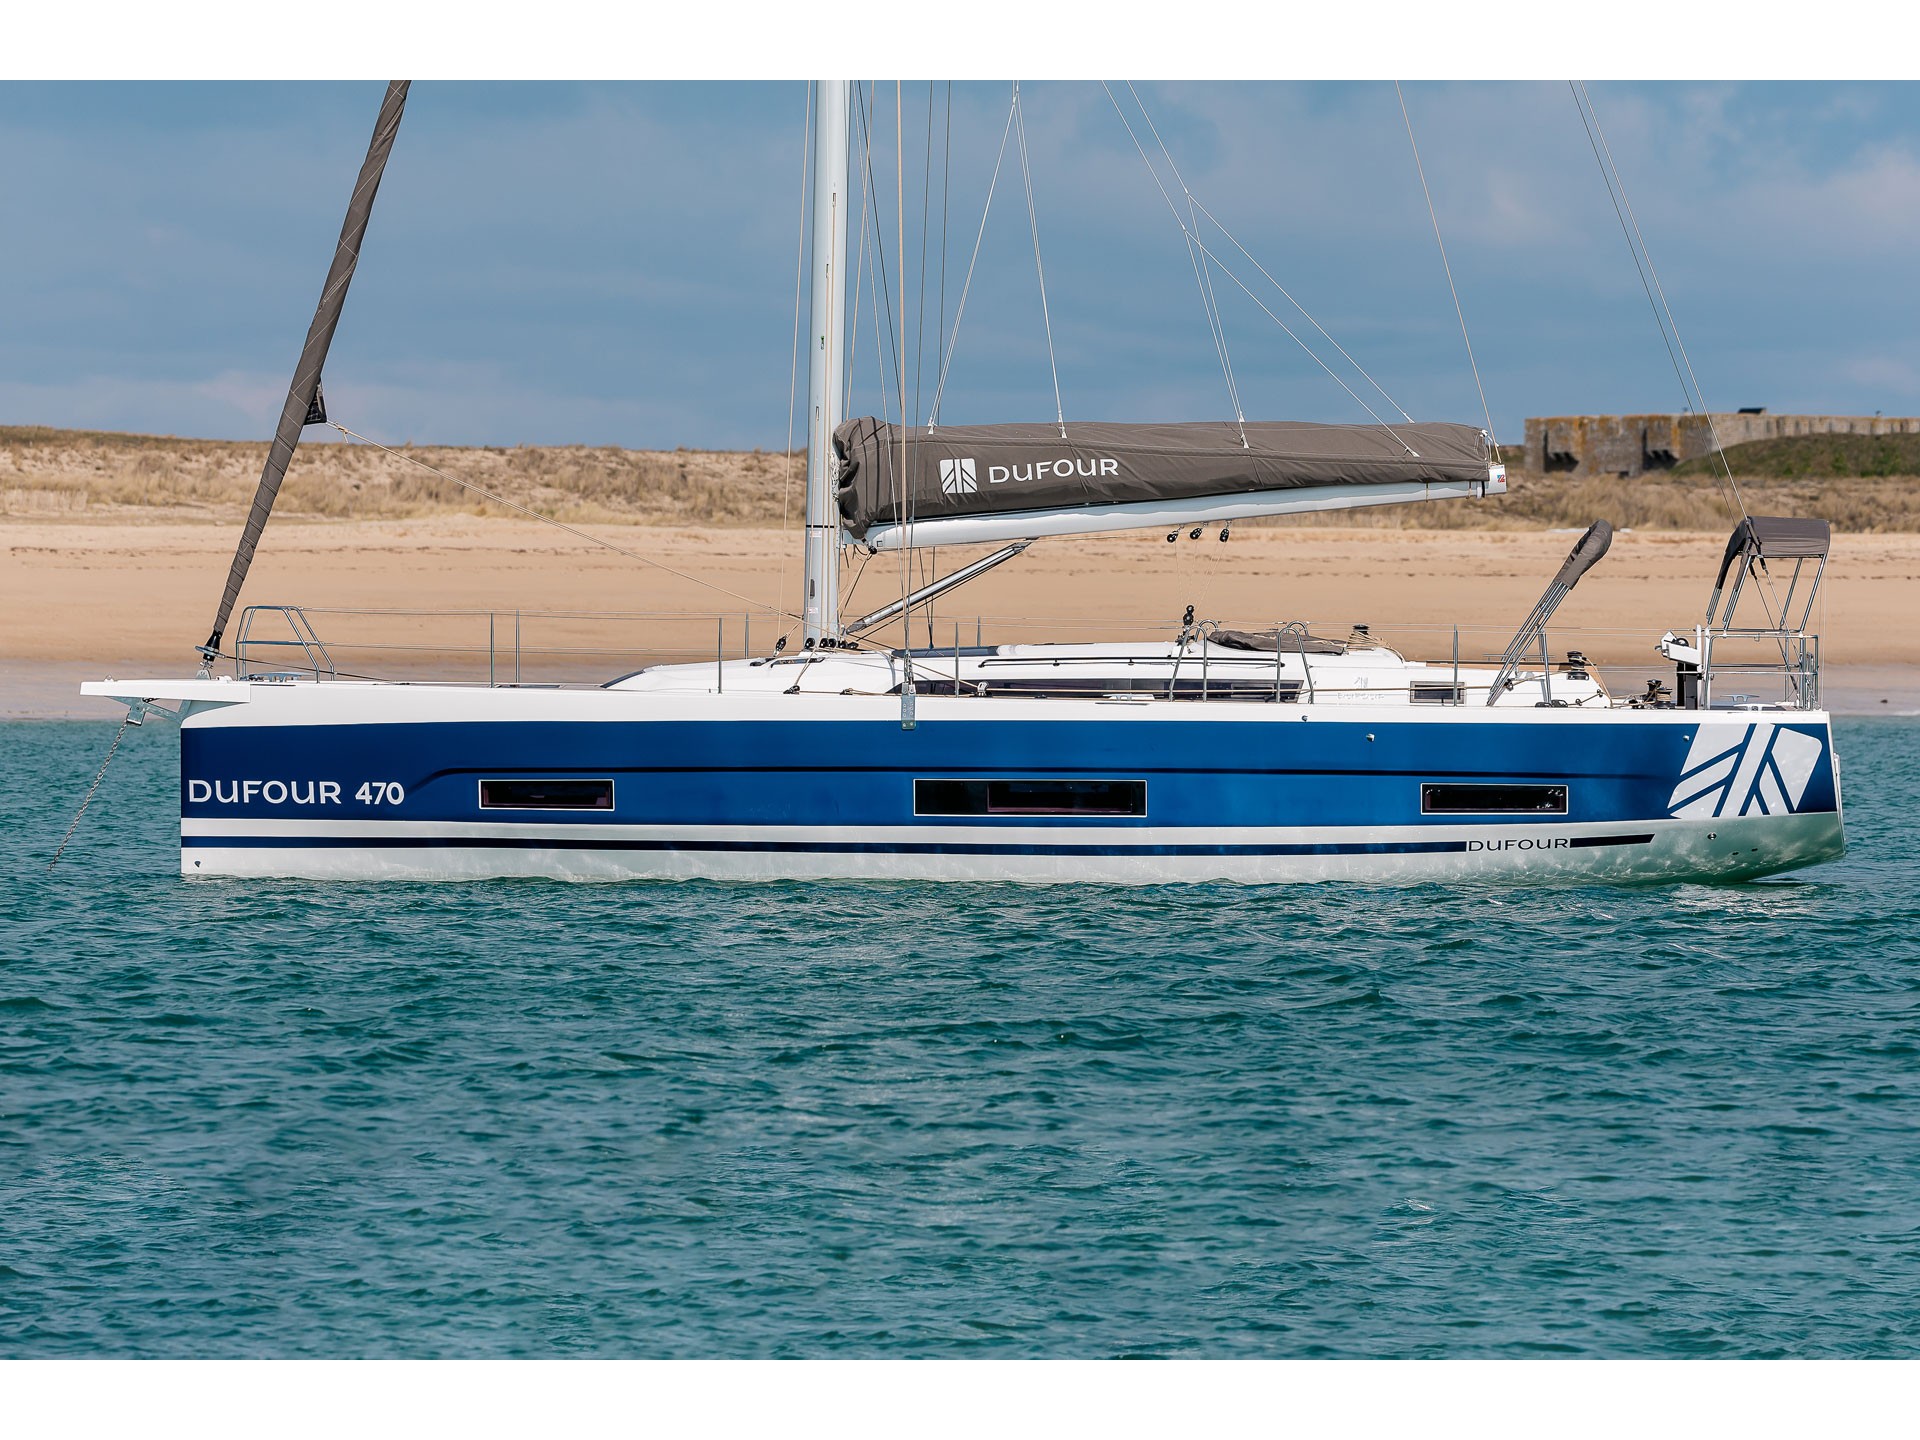 Dufour 470, Greece, Dodecanese, Cost